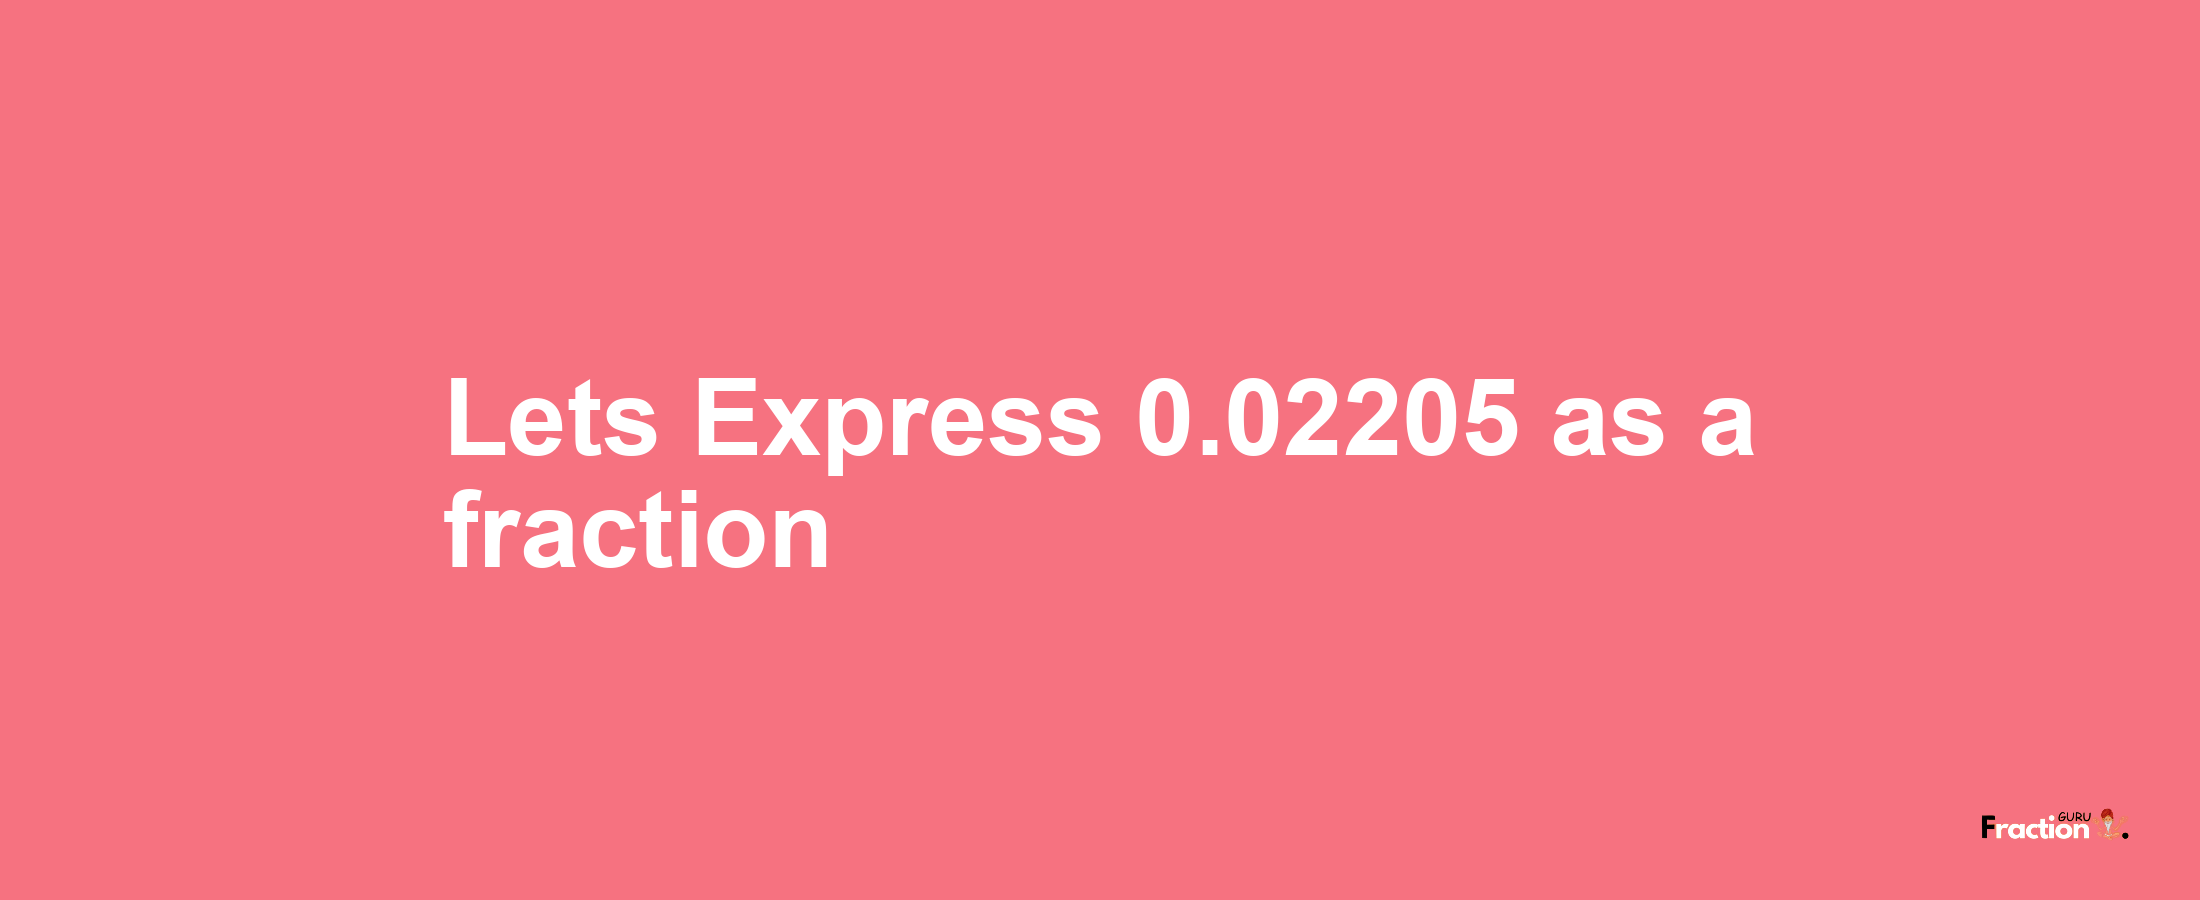 Lets Express 0.02205 as afraction